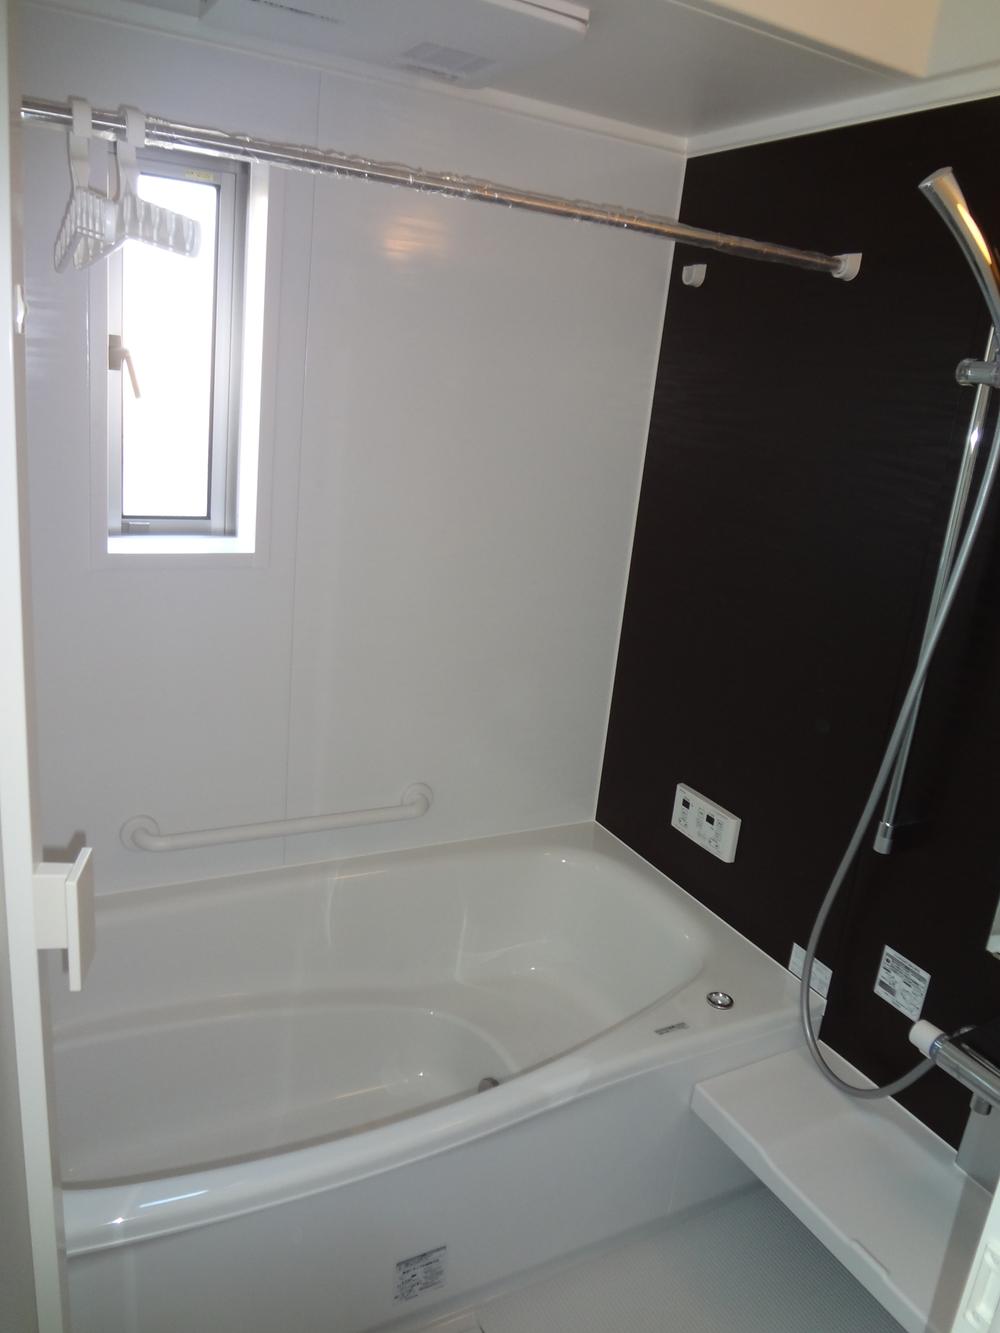 Same specifications photo (bathroom). Bathroom construction example photo  With bathroom ventilation drying function